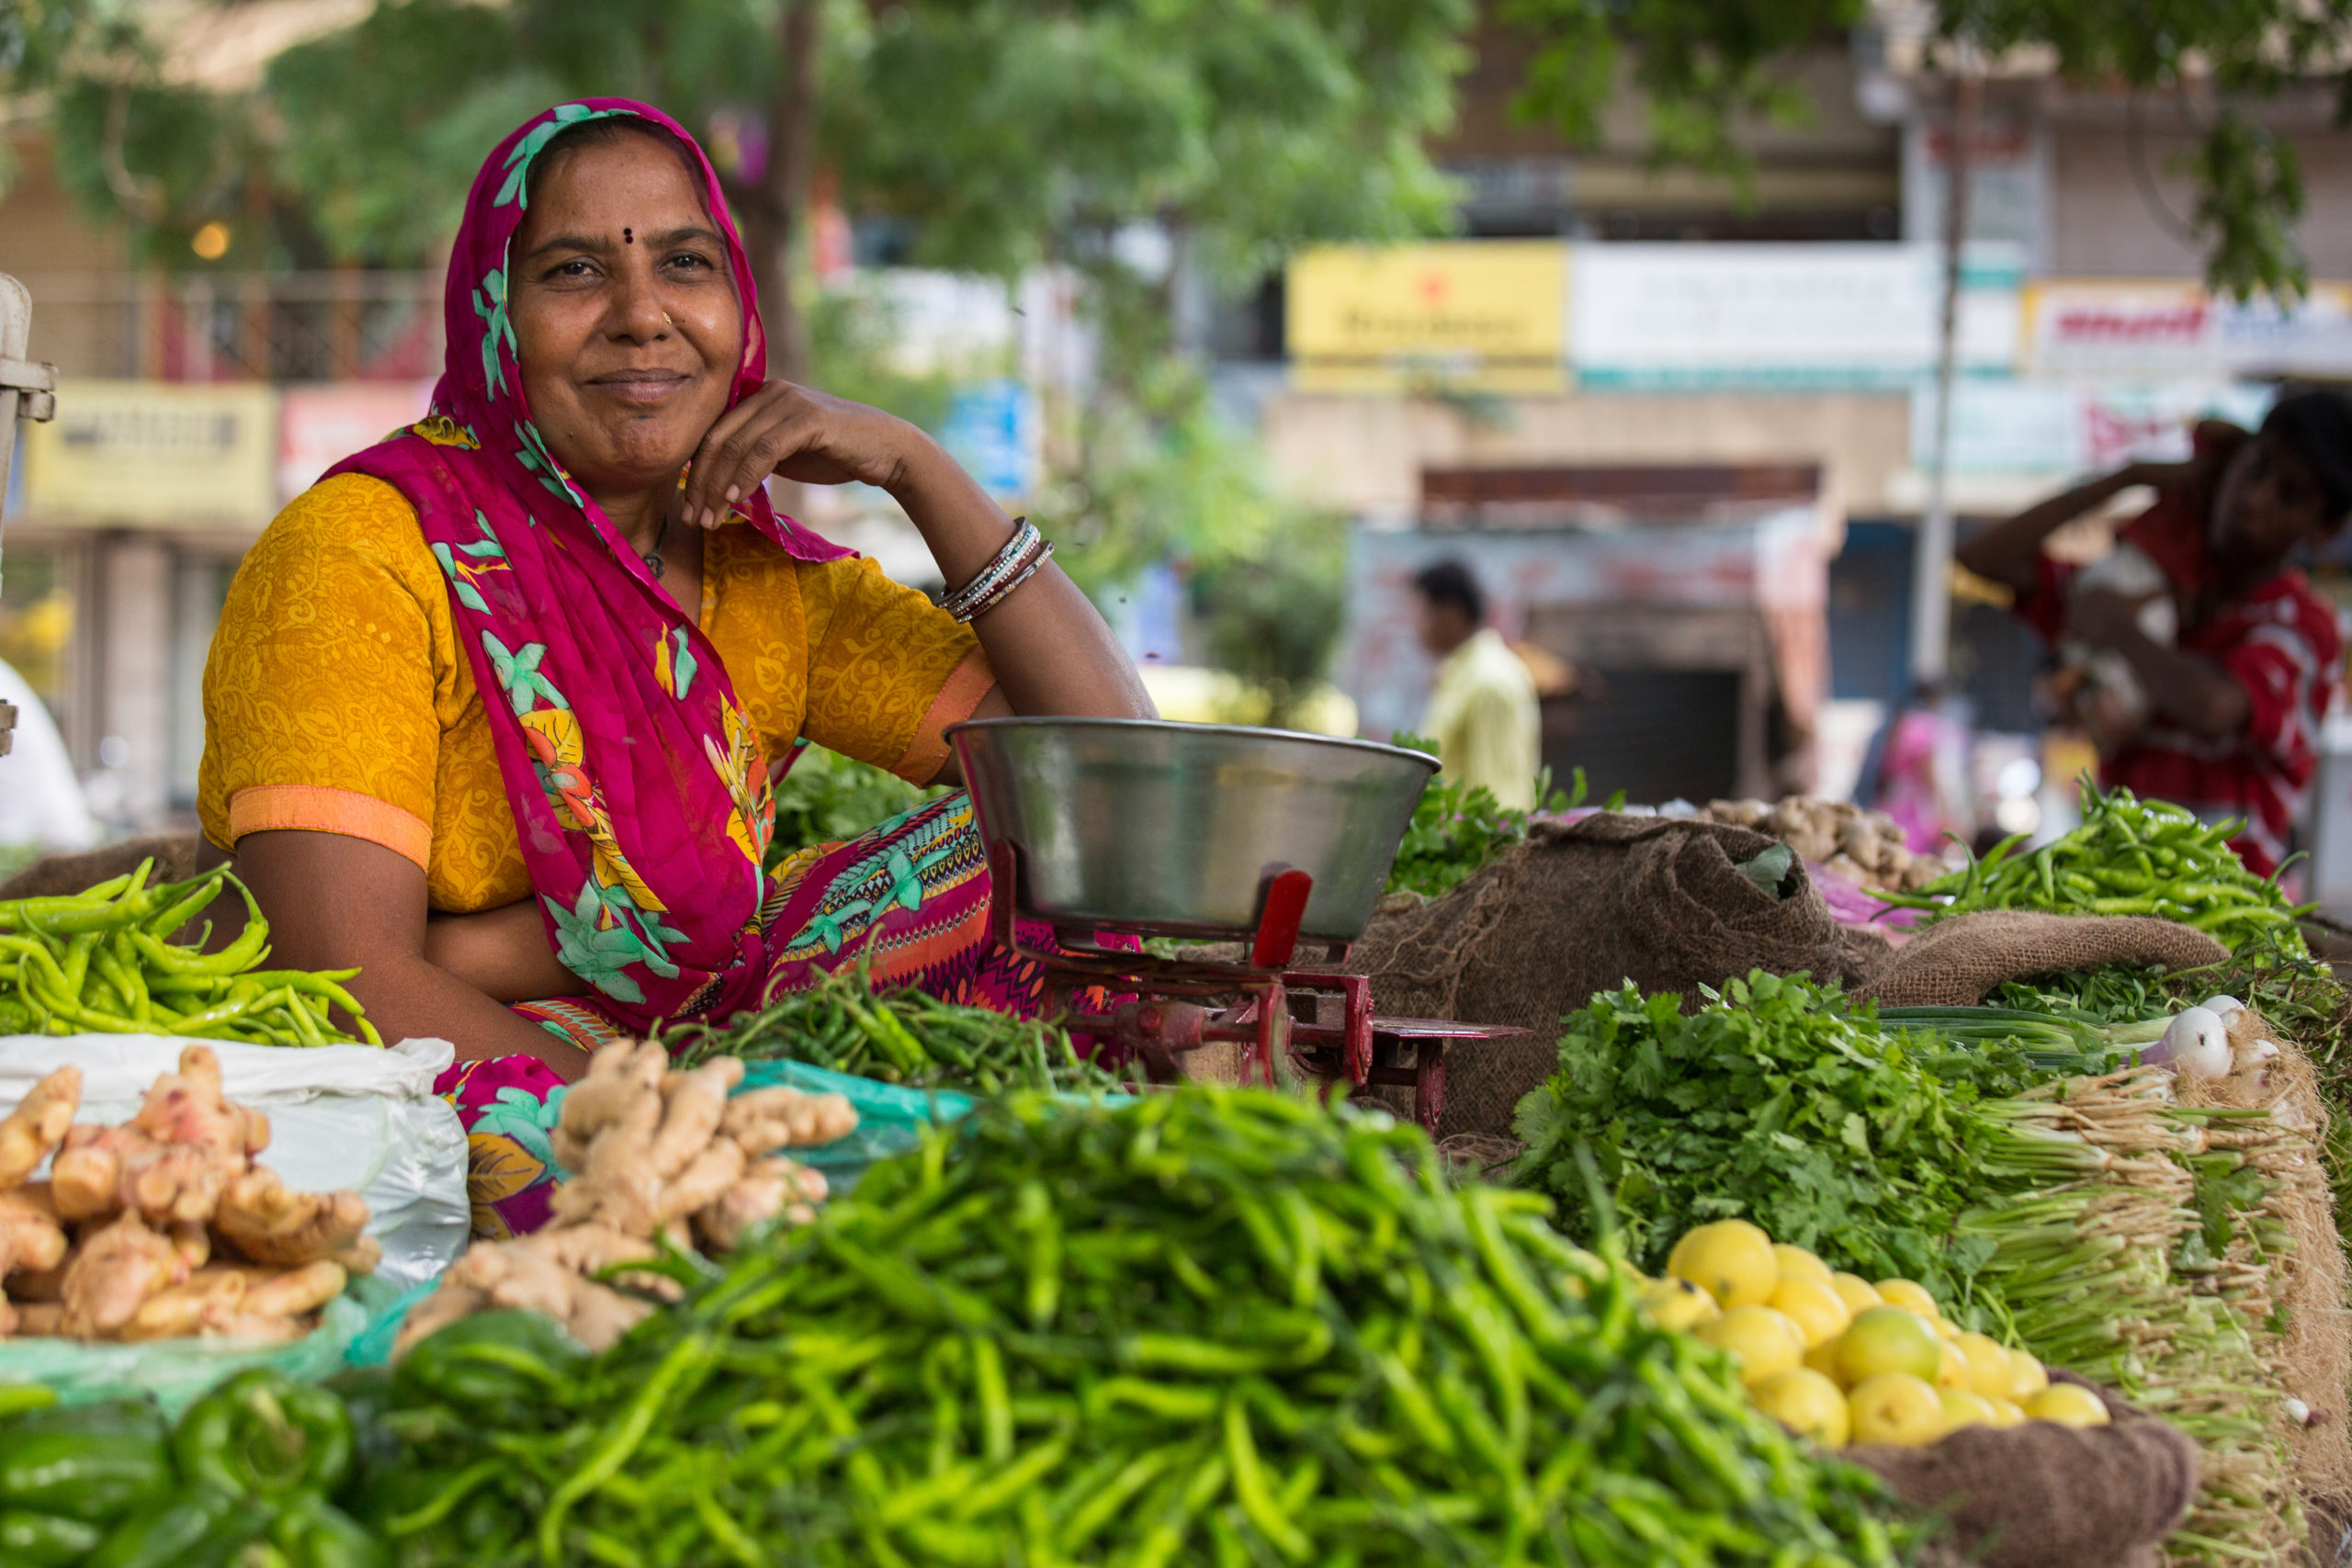 Choral Mauladia poses near by her cart where she sells vegetables at a local market.